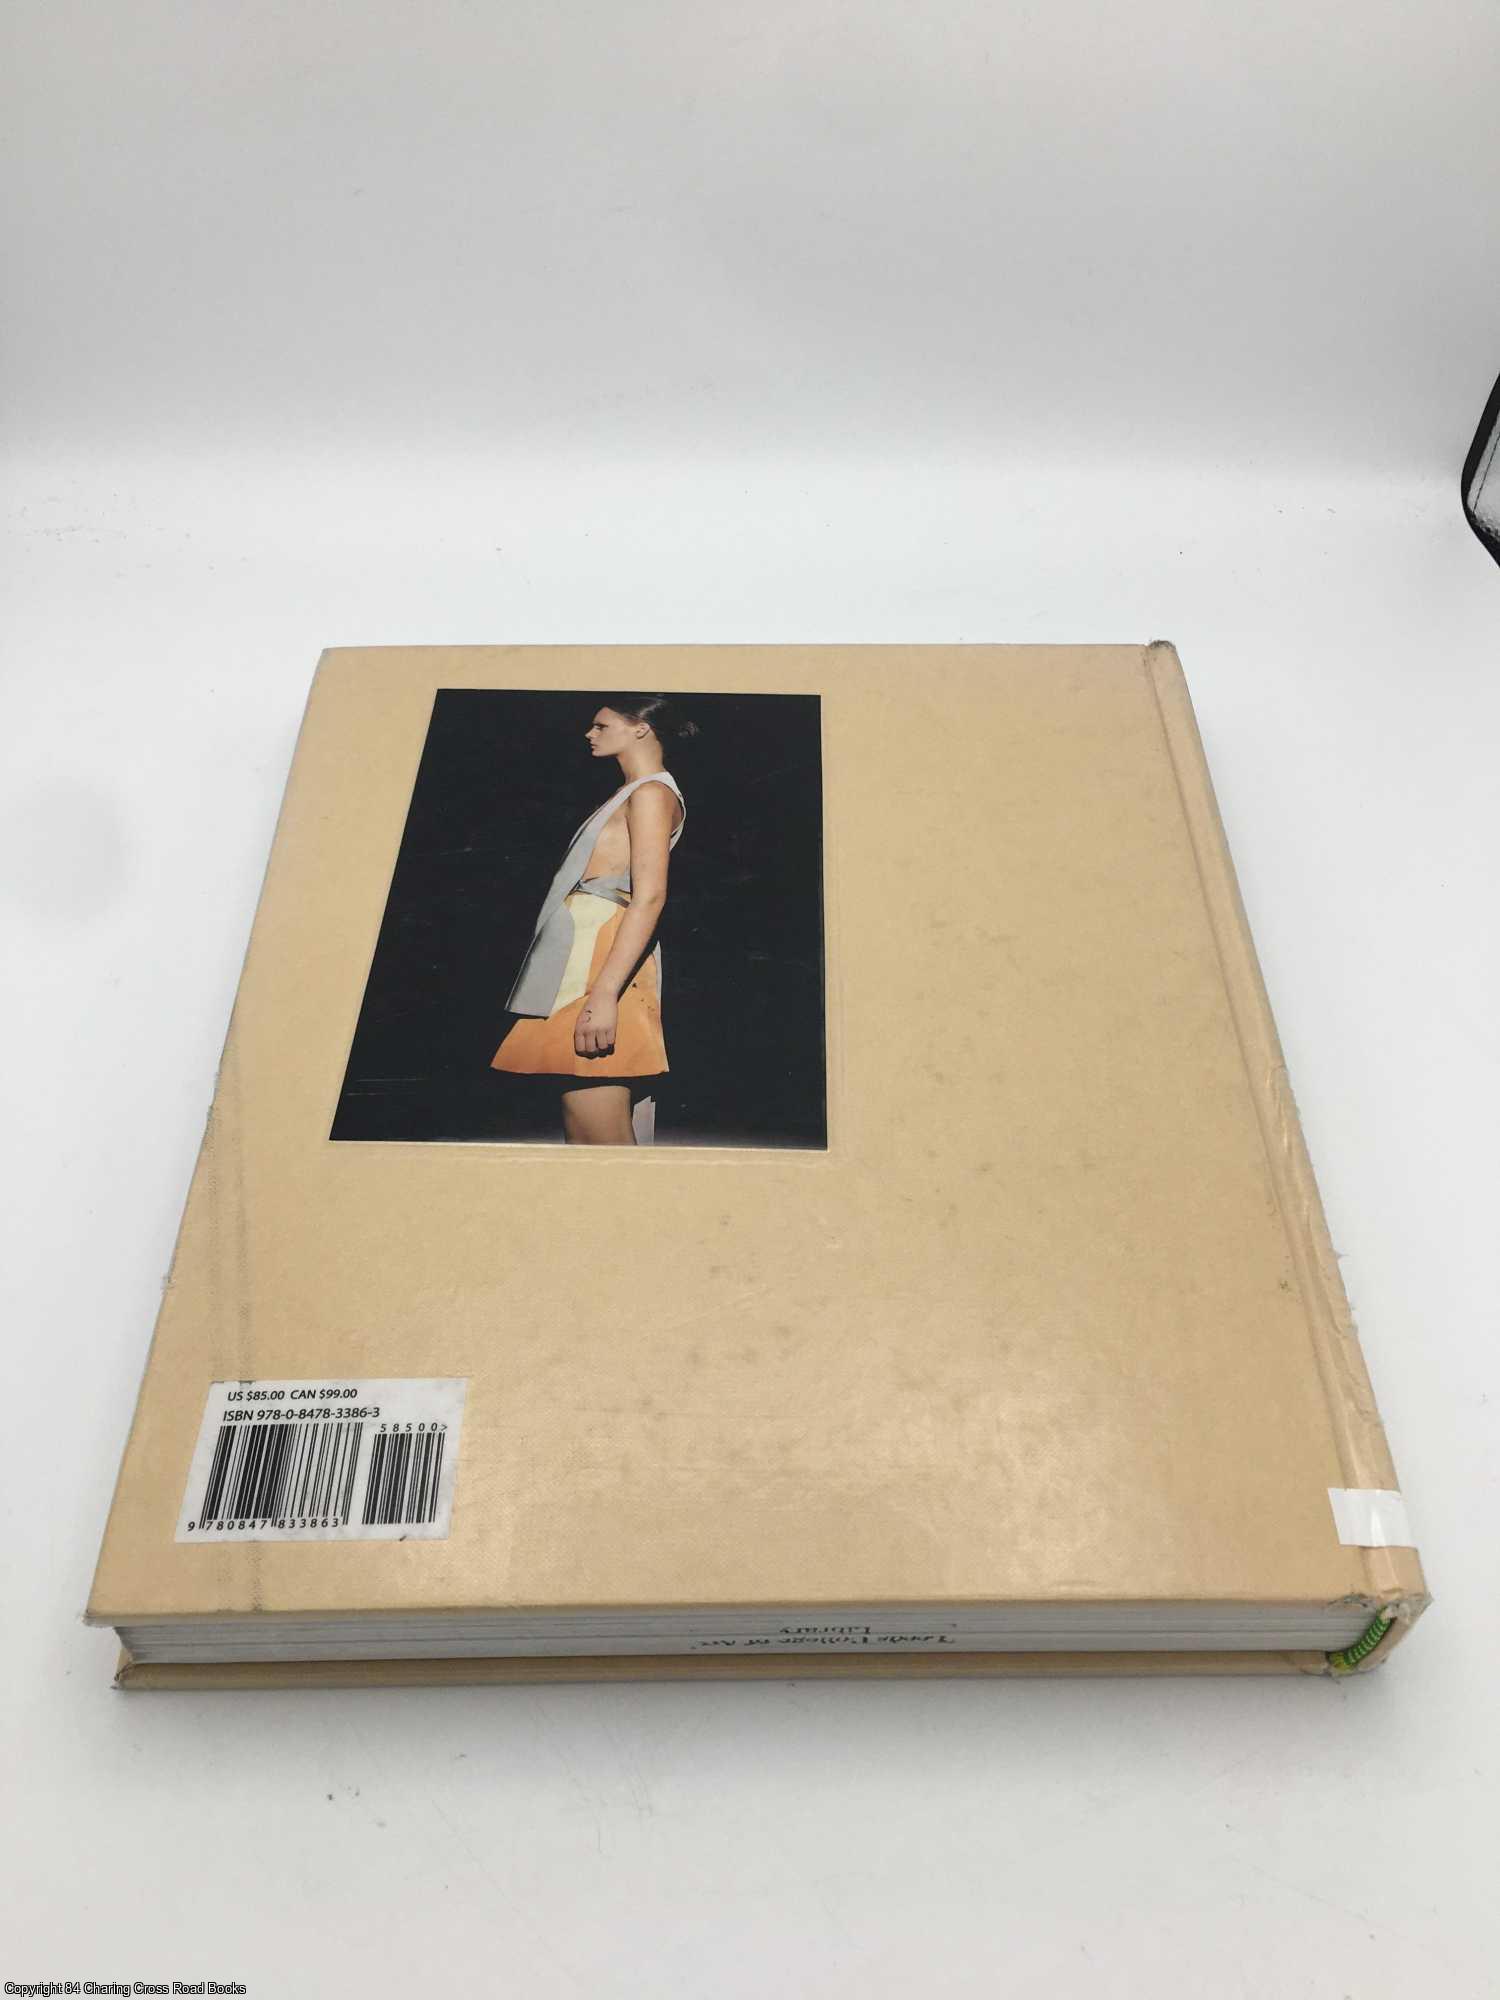 Hussein Chalayan by Judith Clark on 84 Charing Cross Rare Books